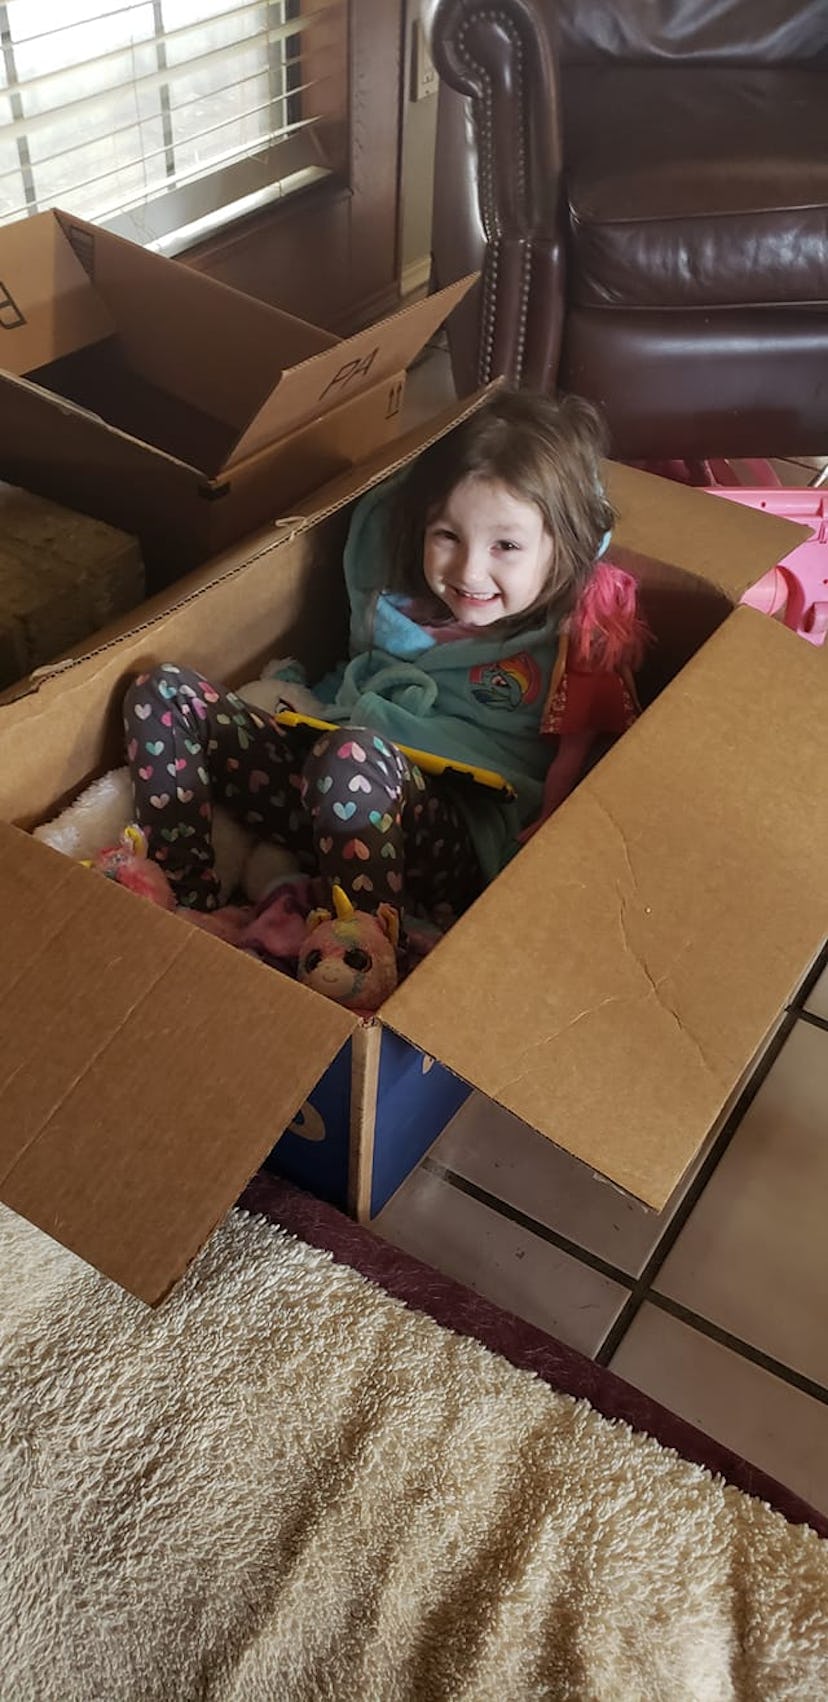 Playing in boxes is one way kids are entertaining themselves during the coronavirus pandemic. 